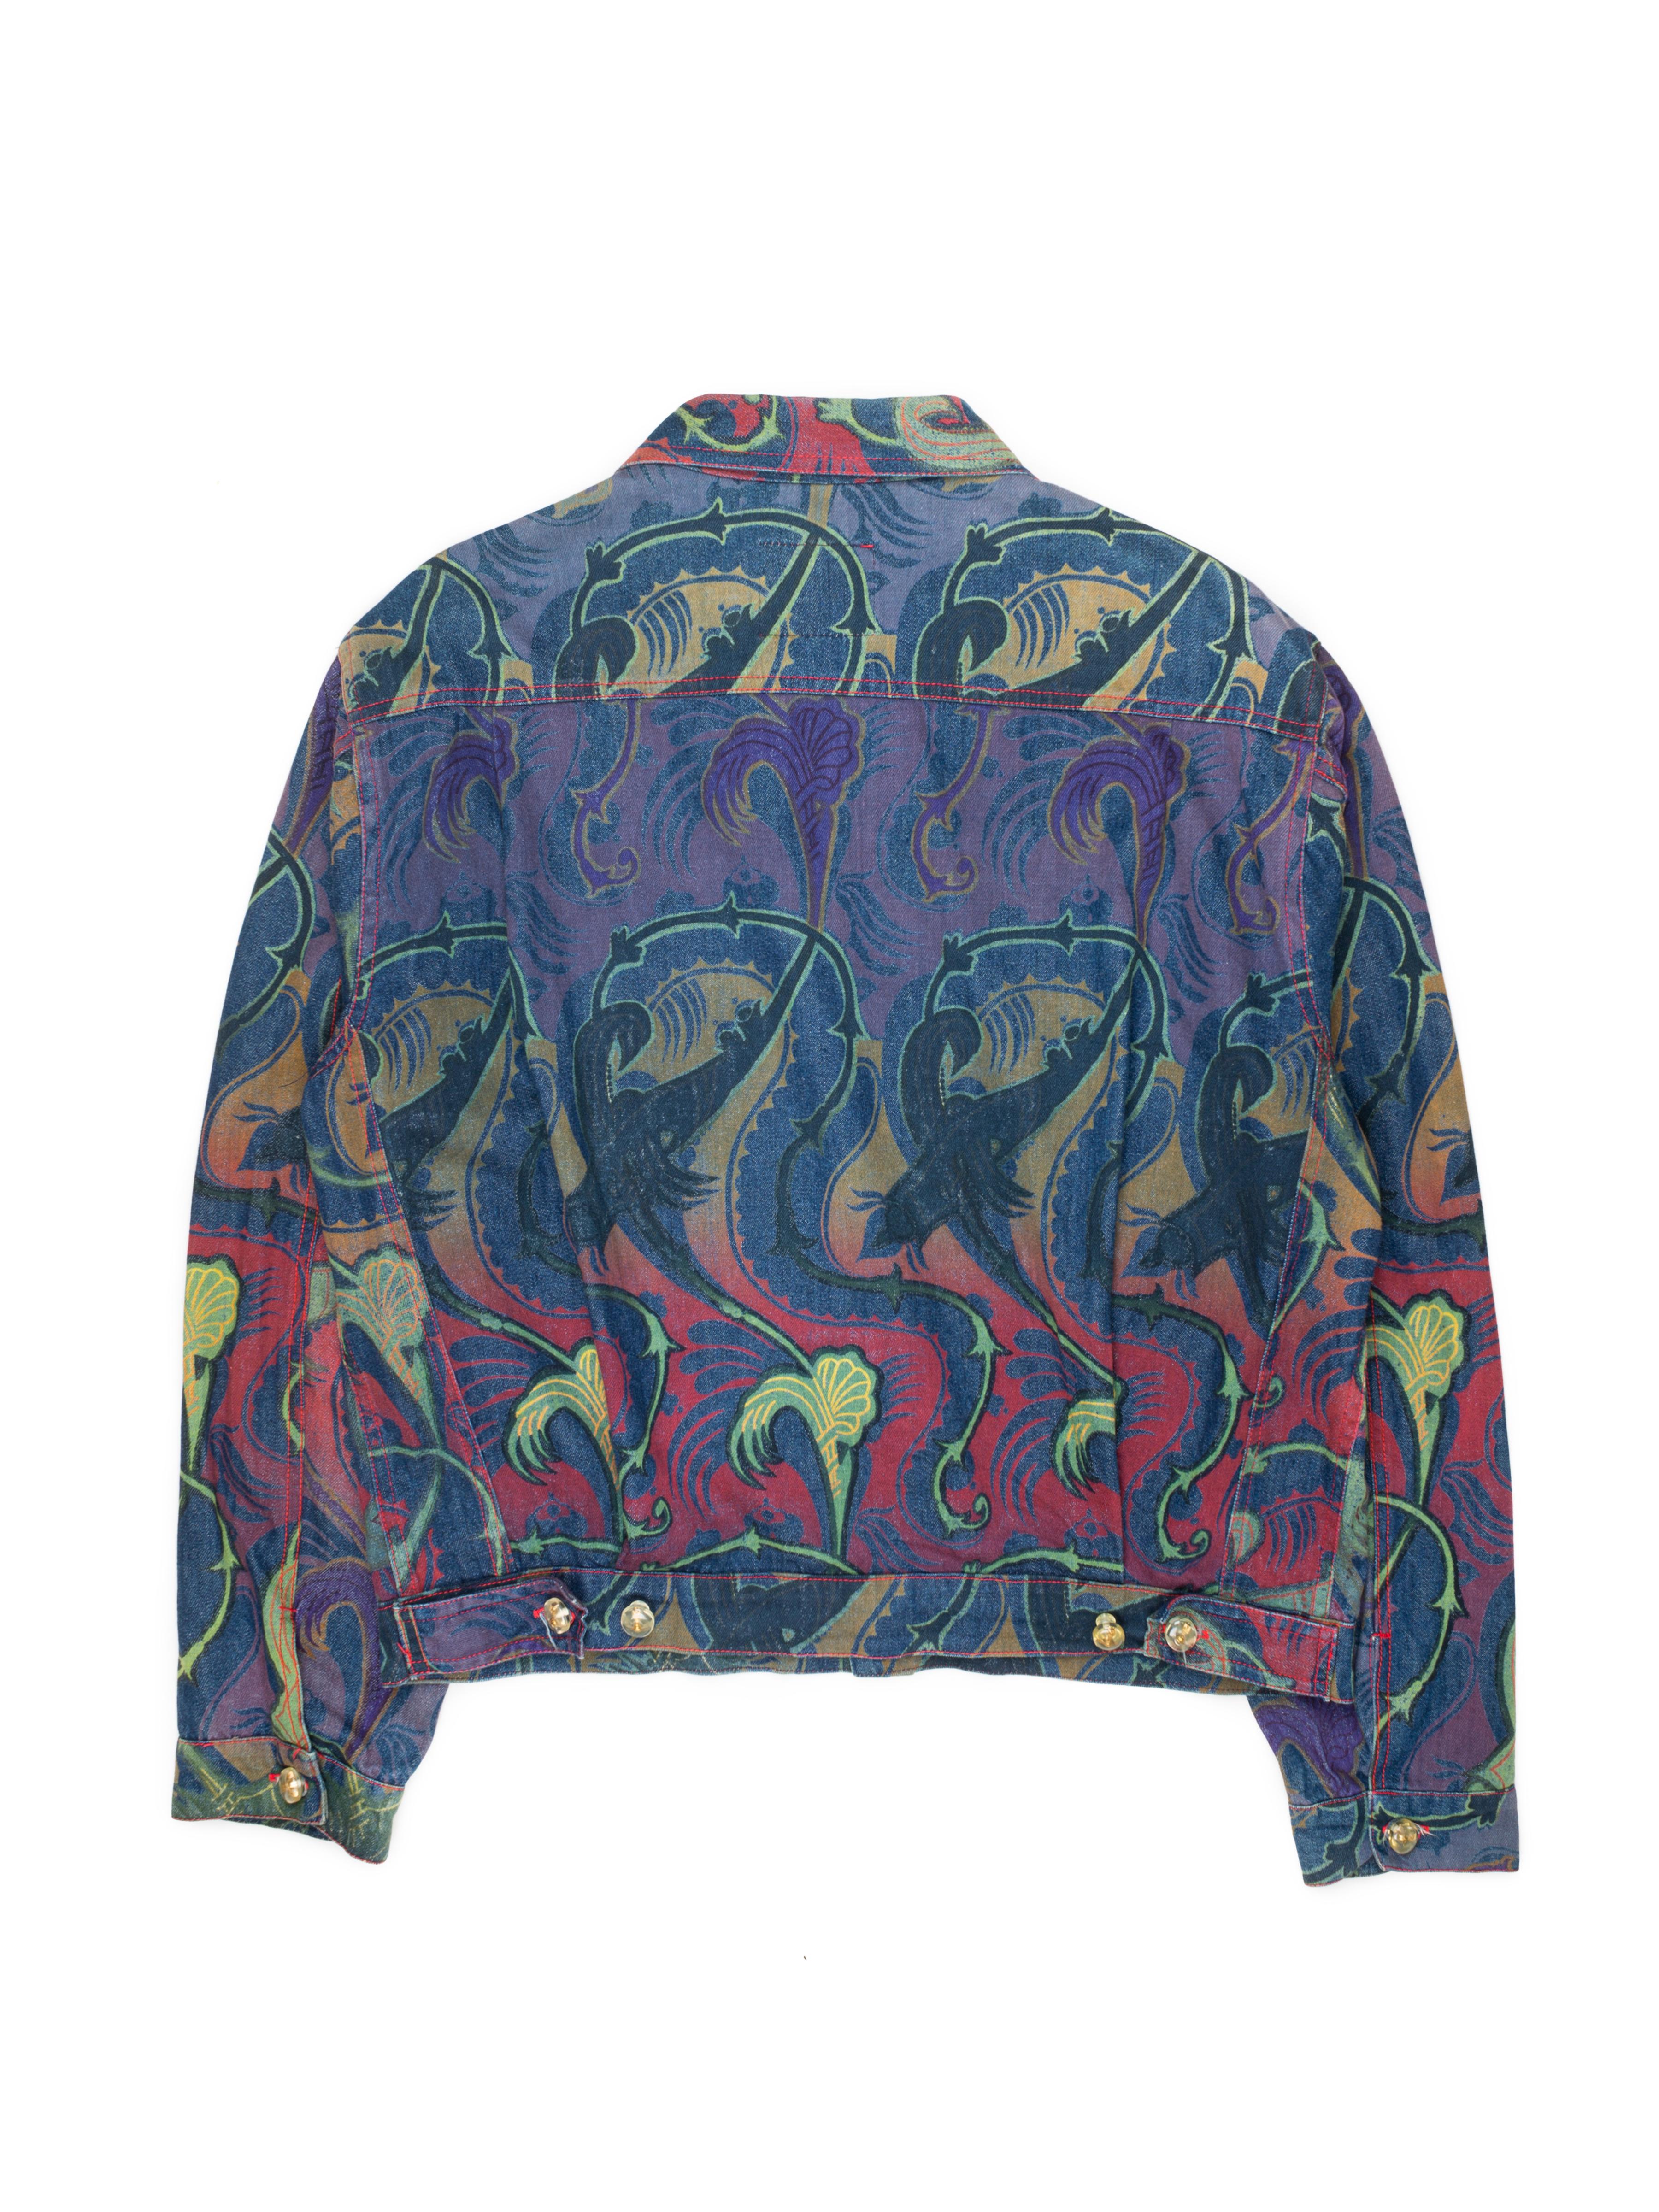 Vivienne Westwood SS1993 Paisley Trucker Jacket In Excellent Condition In Beverly Hills, CA